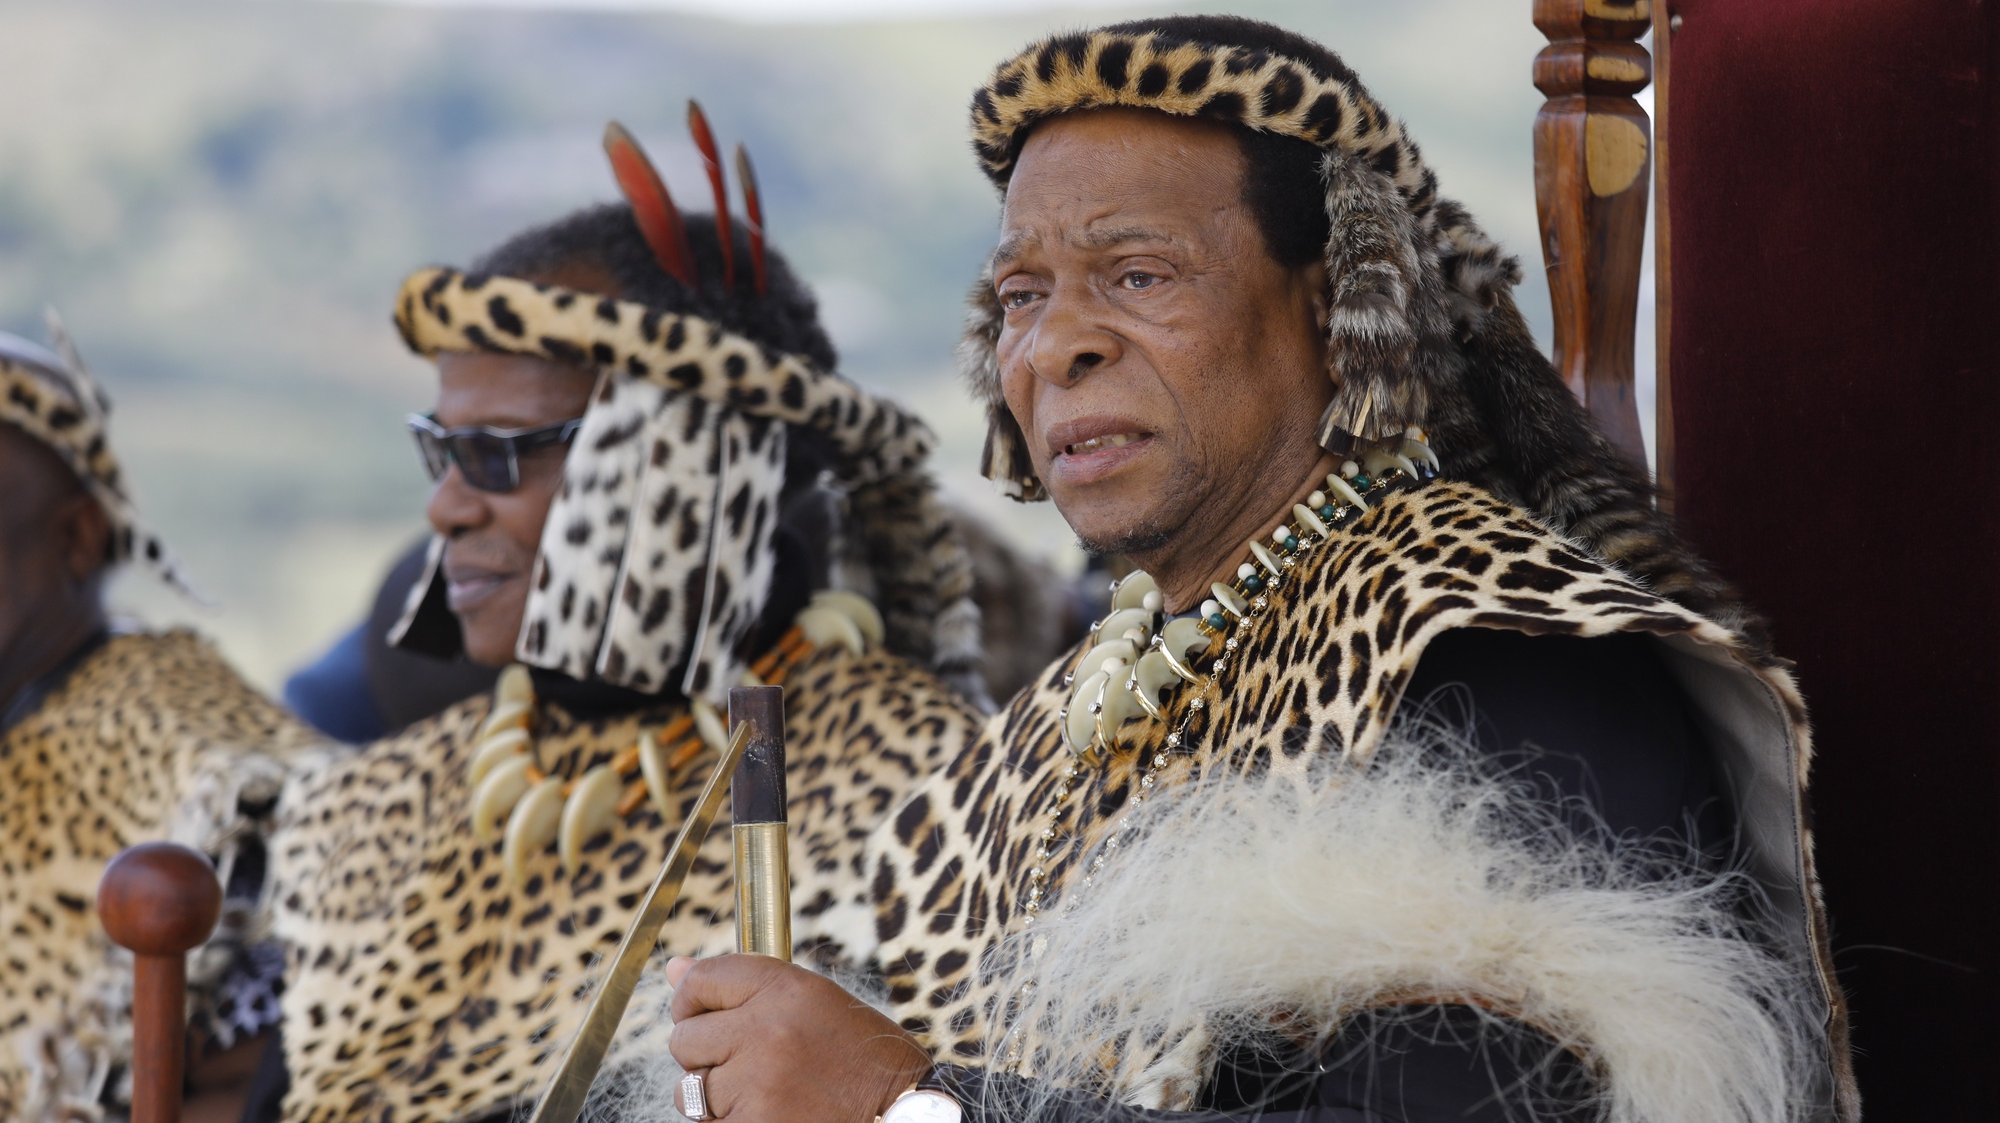 epa07318614 Zulu King Goodwill Zwelithini (R) watches members of a re-enactment group perform as Zulu warriors and British Soldiers during the 140th anniversary re-enectment of the Battle of Isandluana in Dundee, South Africa, 25 January 2019. The battle happened during the Anglo-Zulu Wars in 1879 and was the first between the Zulu nation and the British. 20,000 Zulu&#039;s attacked 1,800 British soldiers. The Zulu&#039;s ultimately overwelmed the British and won the battle.  EPA/KIM LUDBROOK